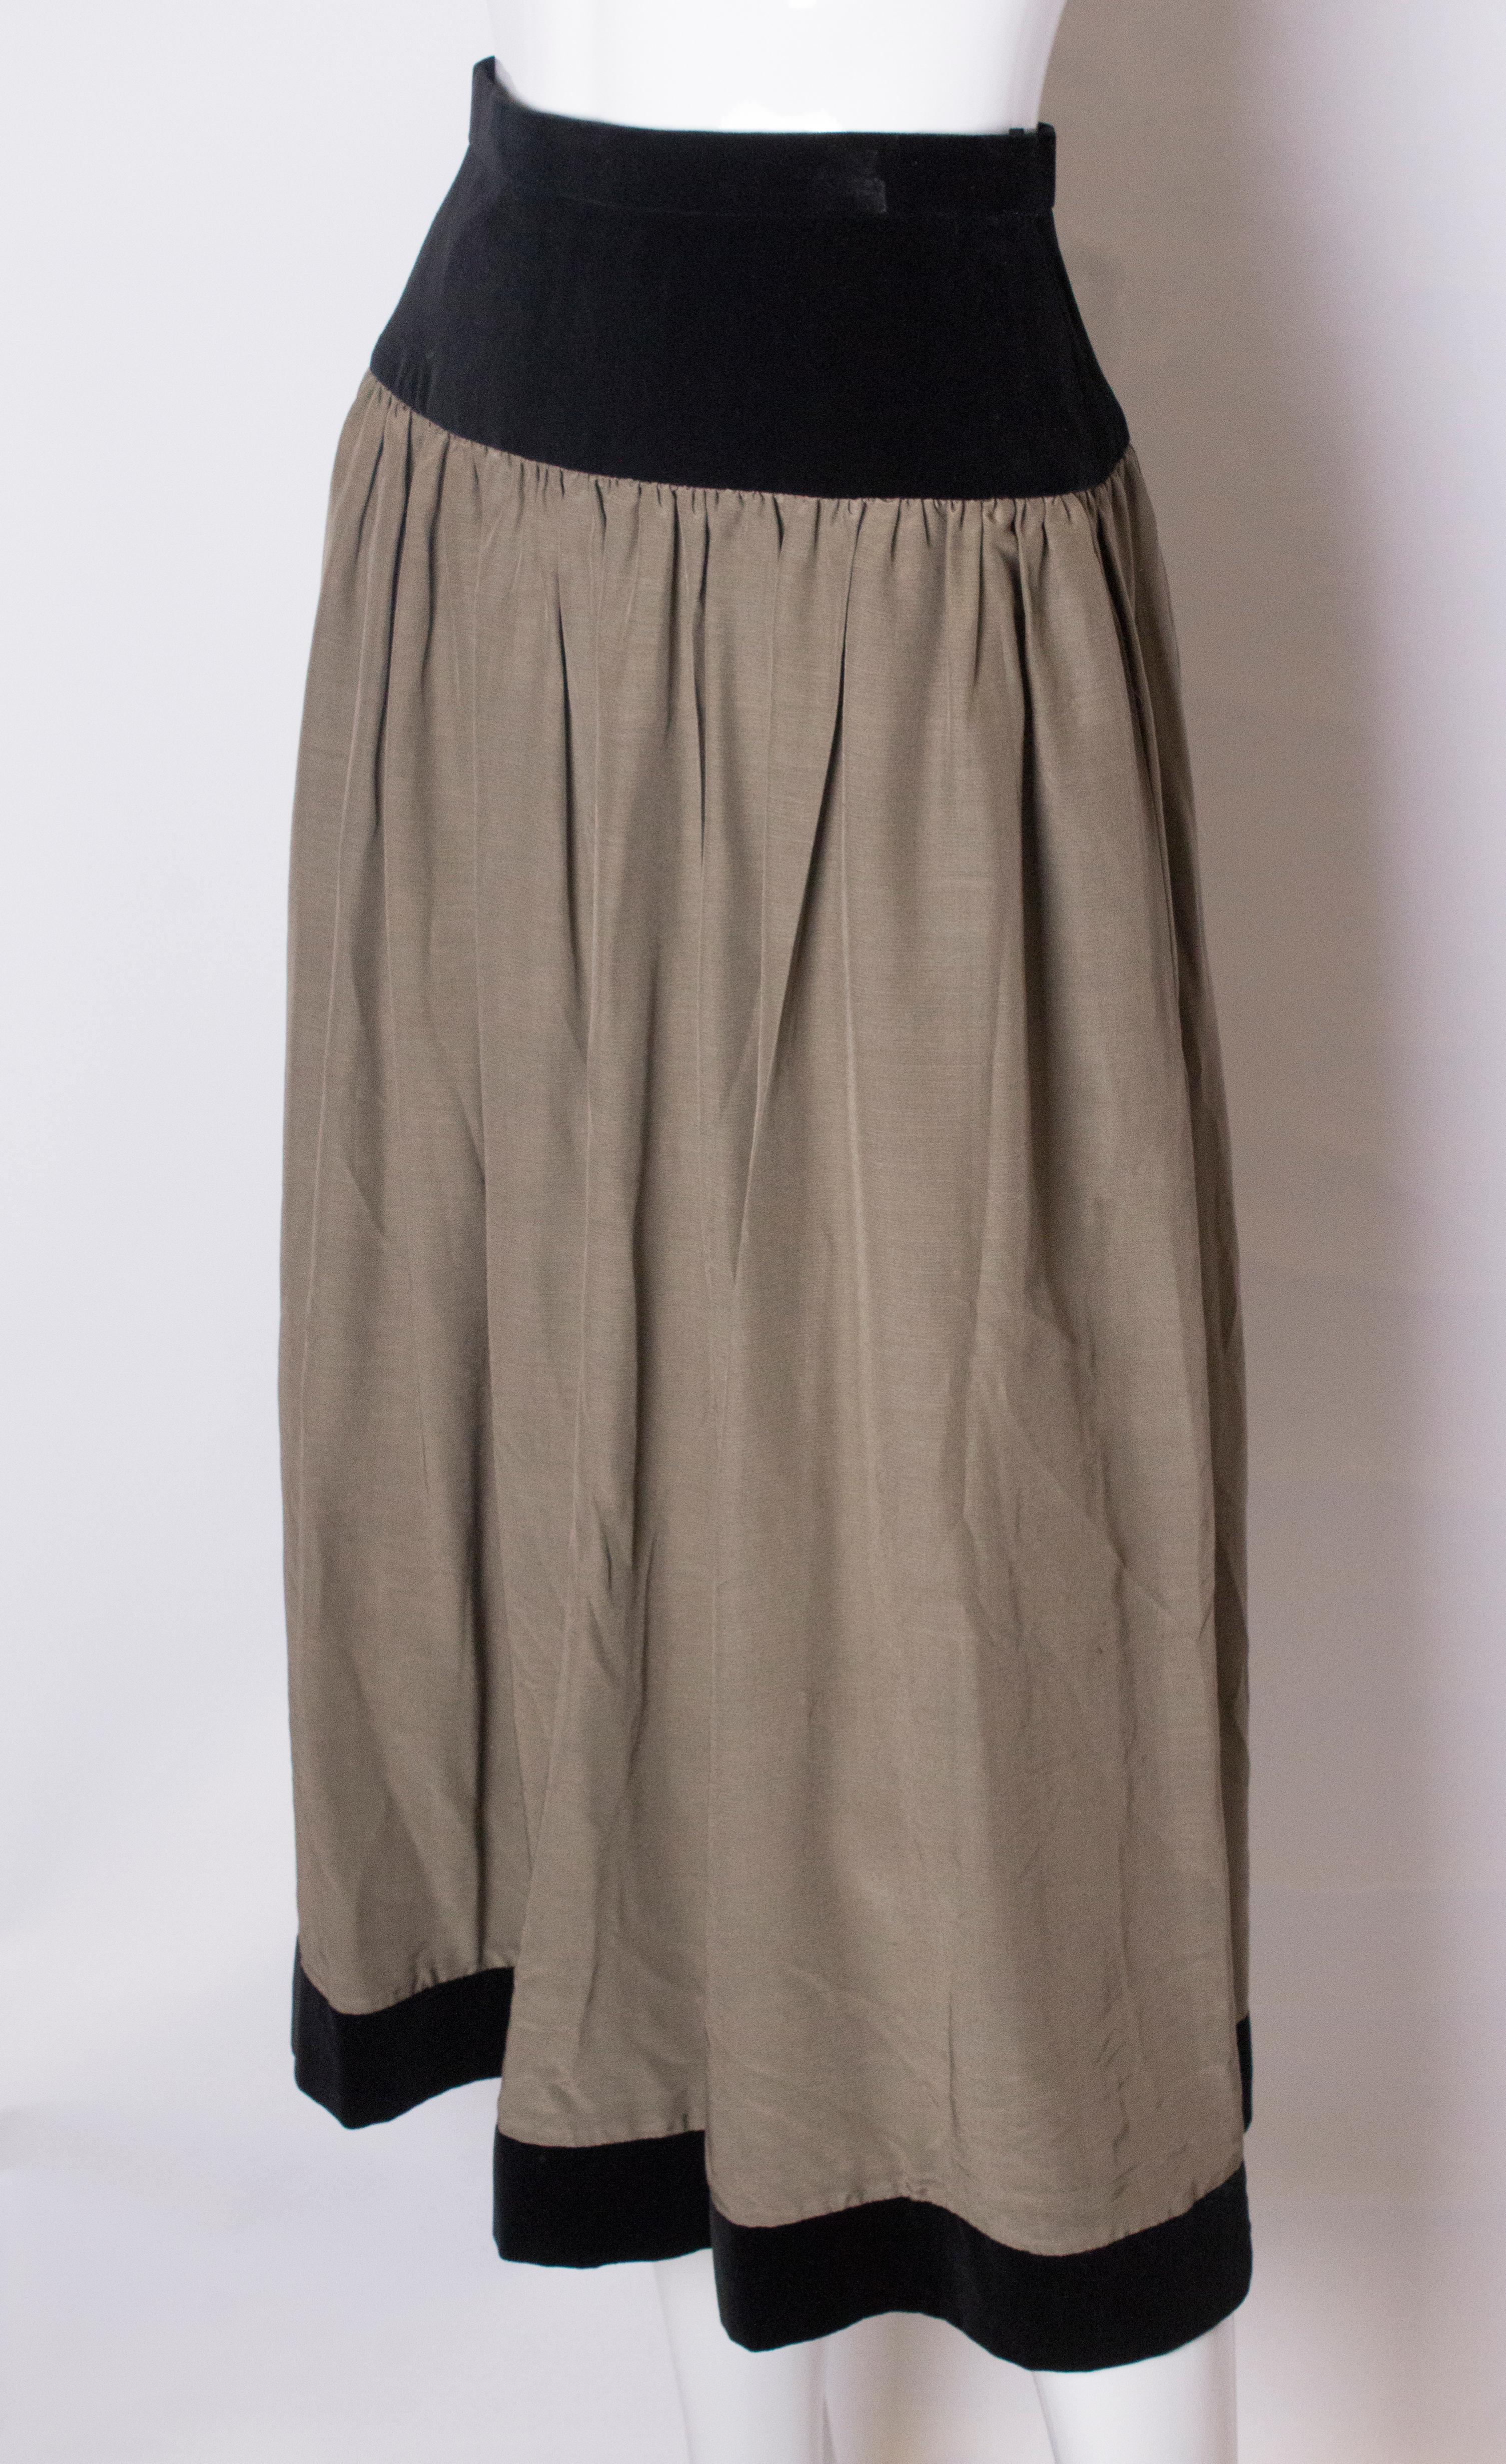 
A vintage Roland Klein skirt in  black silk velvet and  greysilk The skirt has a velvet band from the waist down producing a flattering line, and grey silk for the main part of the skirt with a 2 1/4'' black velvet border at the hem.  The skirt is